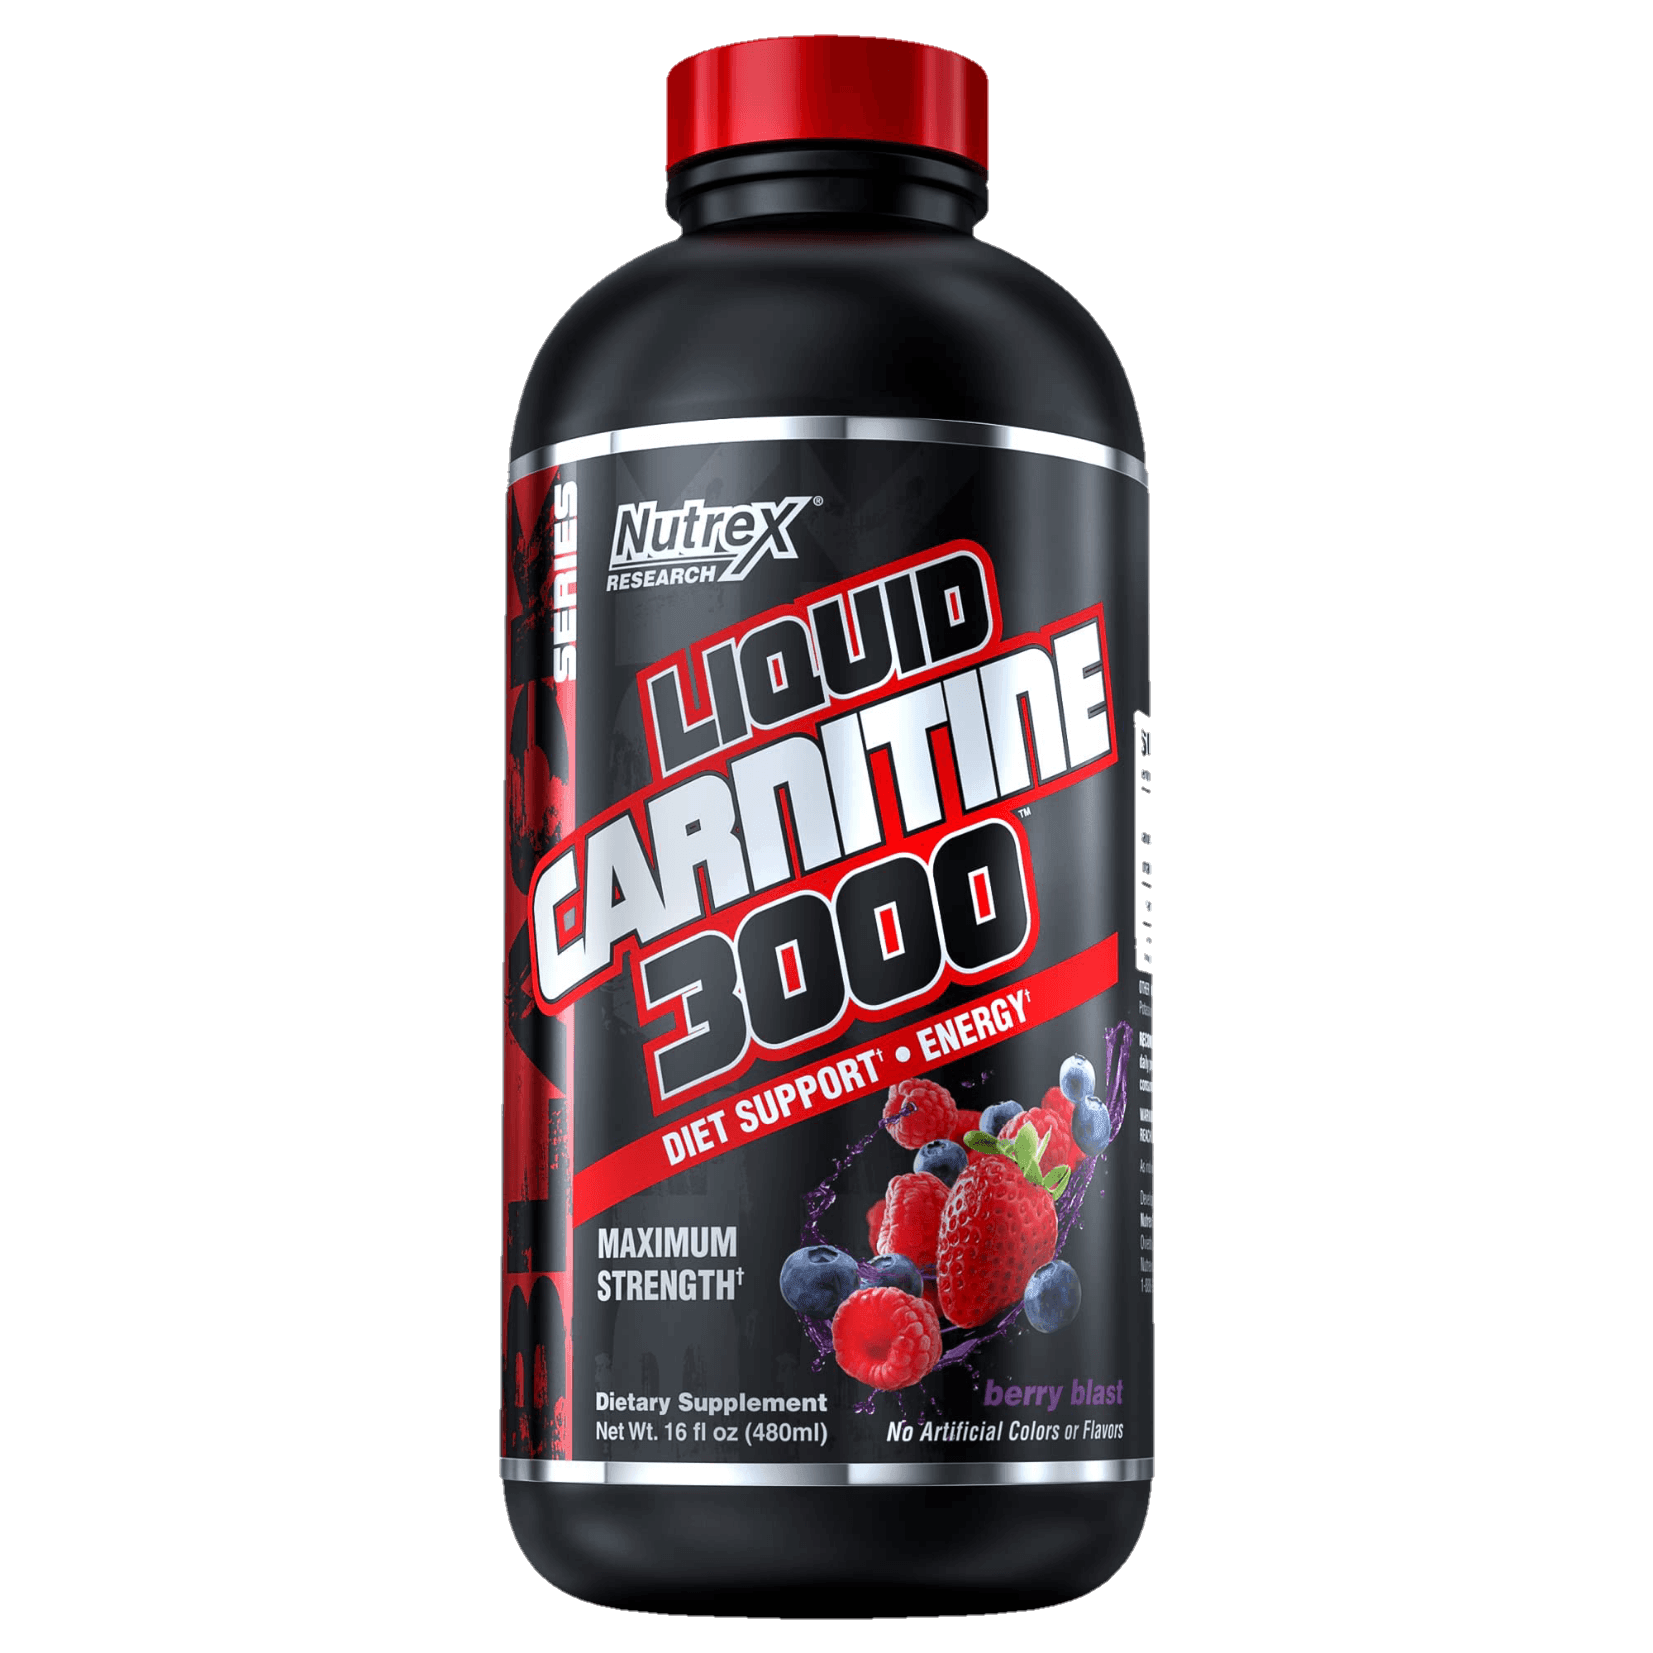 L-Carnitine - The Supplements Factory